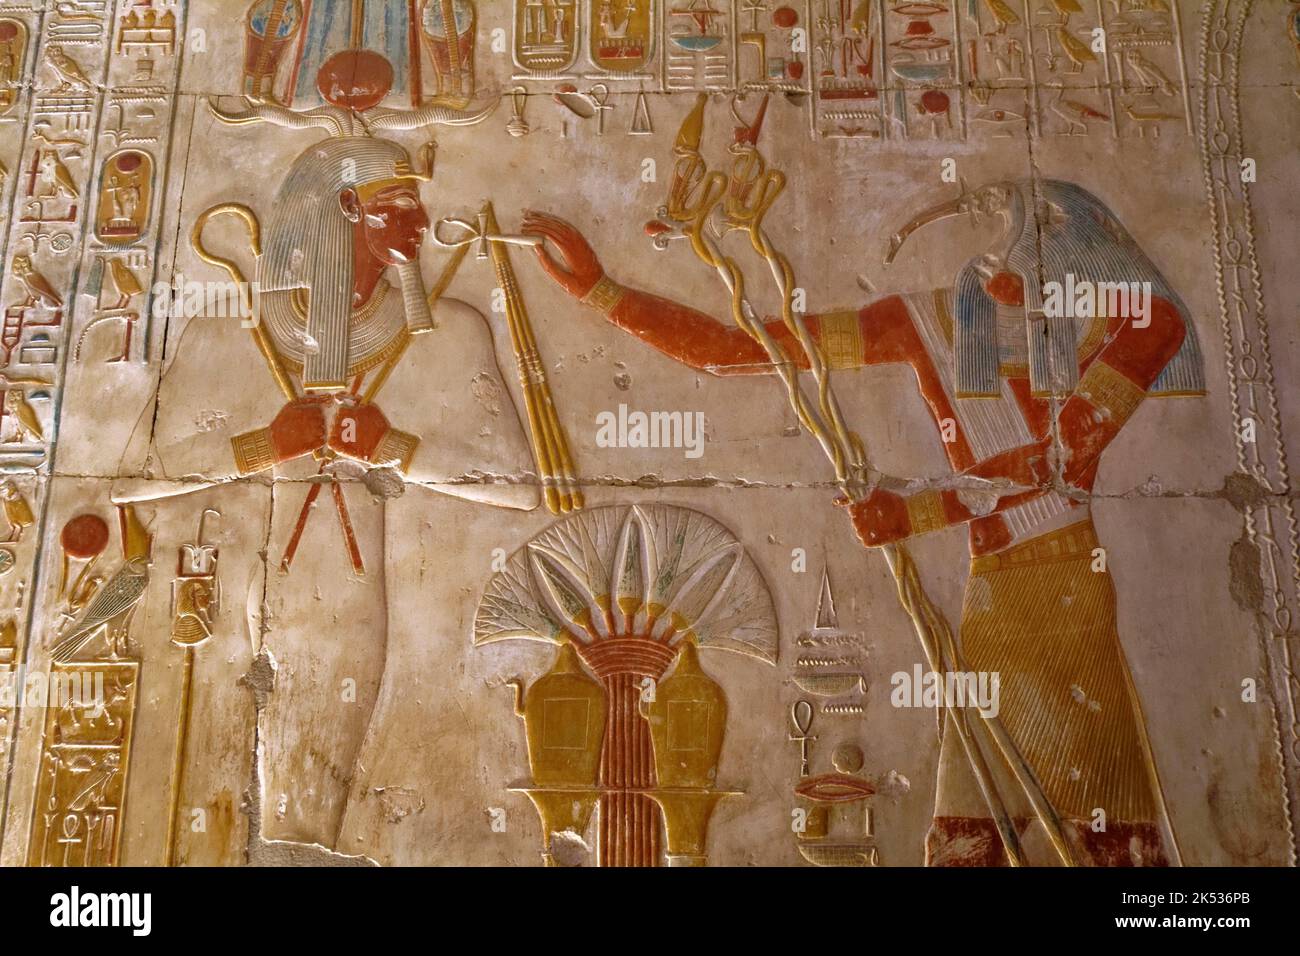 Egypt, Middle Egypt, Nile Valley, Abydos, temple of Seti 1, low relief showing the Ibis headed god Thoth praising god of the dead Osiris Stock Photo